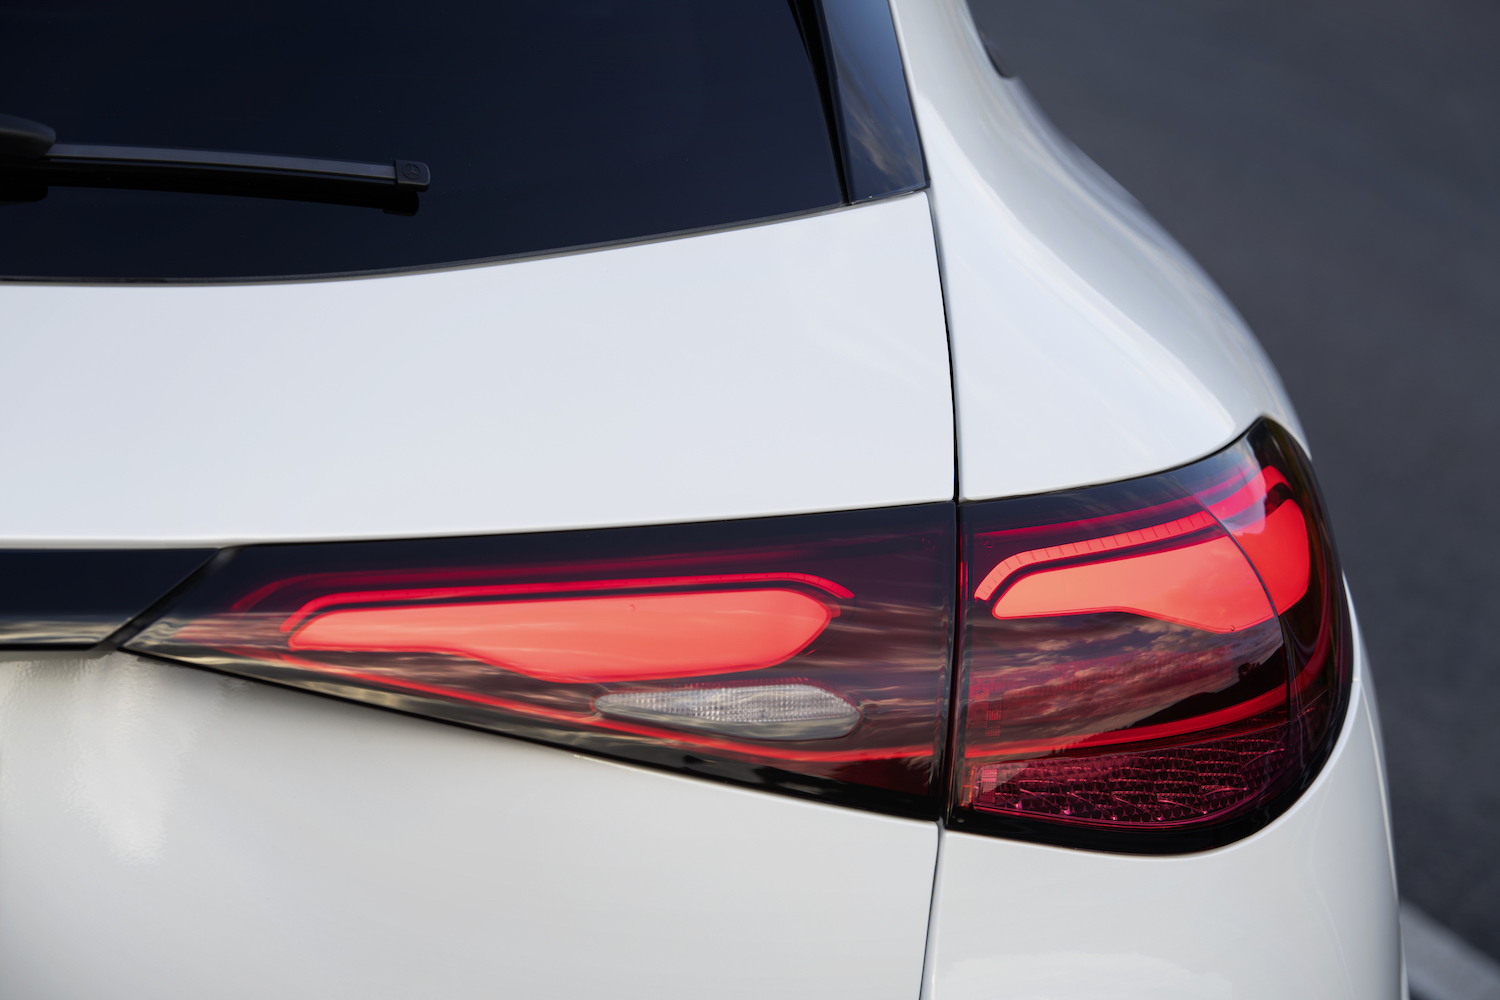 Close up of taillights on the 2023 Mercedes-Benz GLC parked on a street.